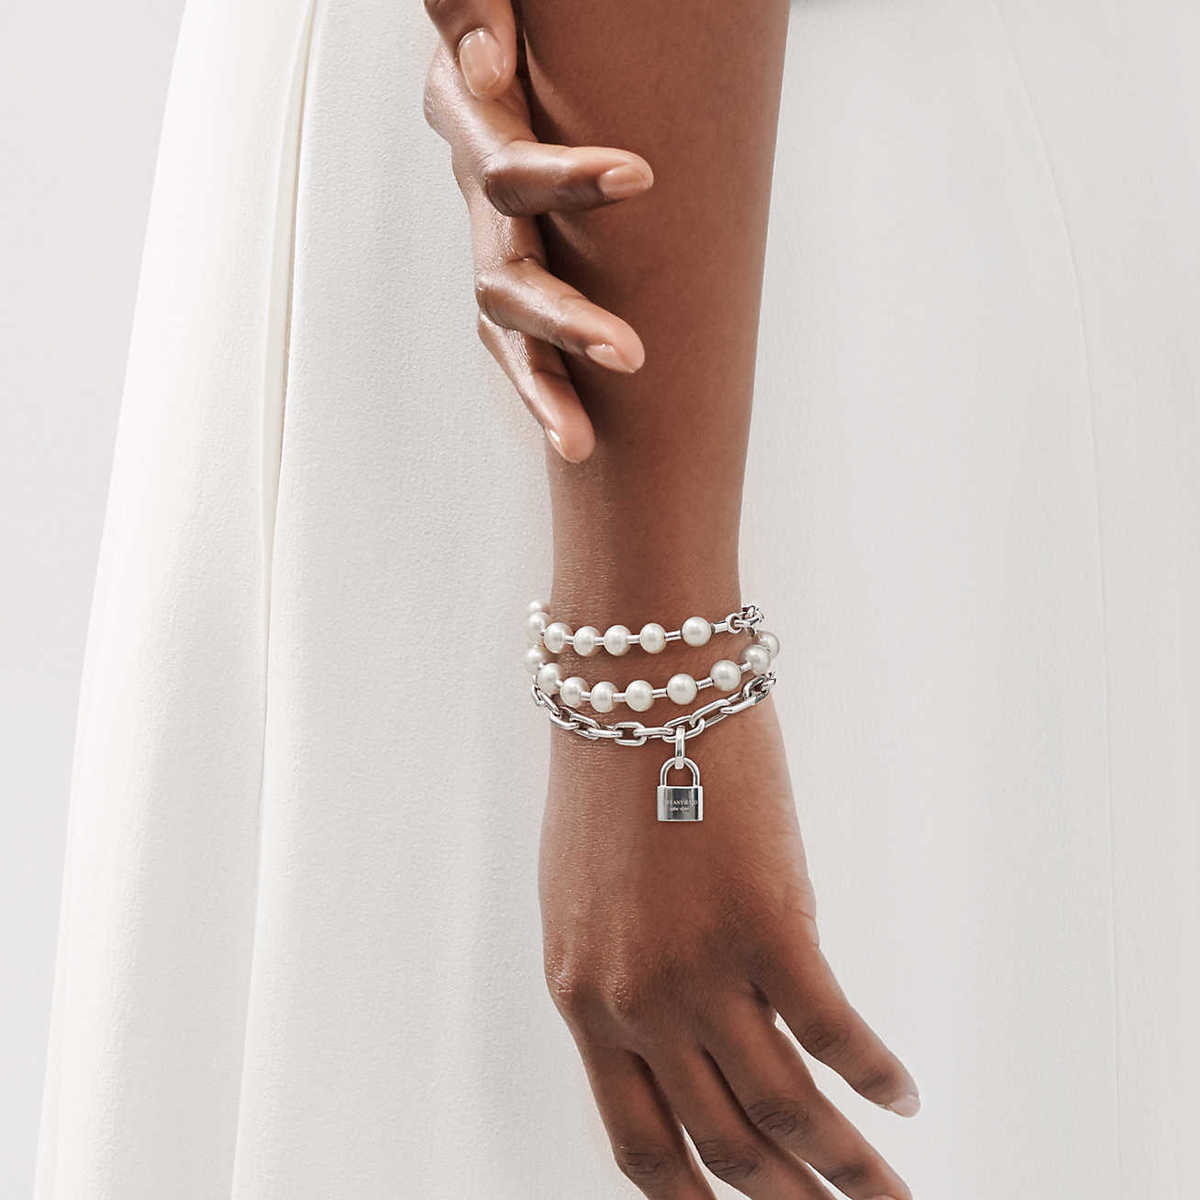 Tiffany & Co Launch Pearl HardWear Collection